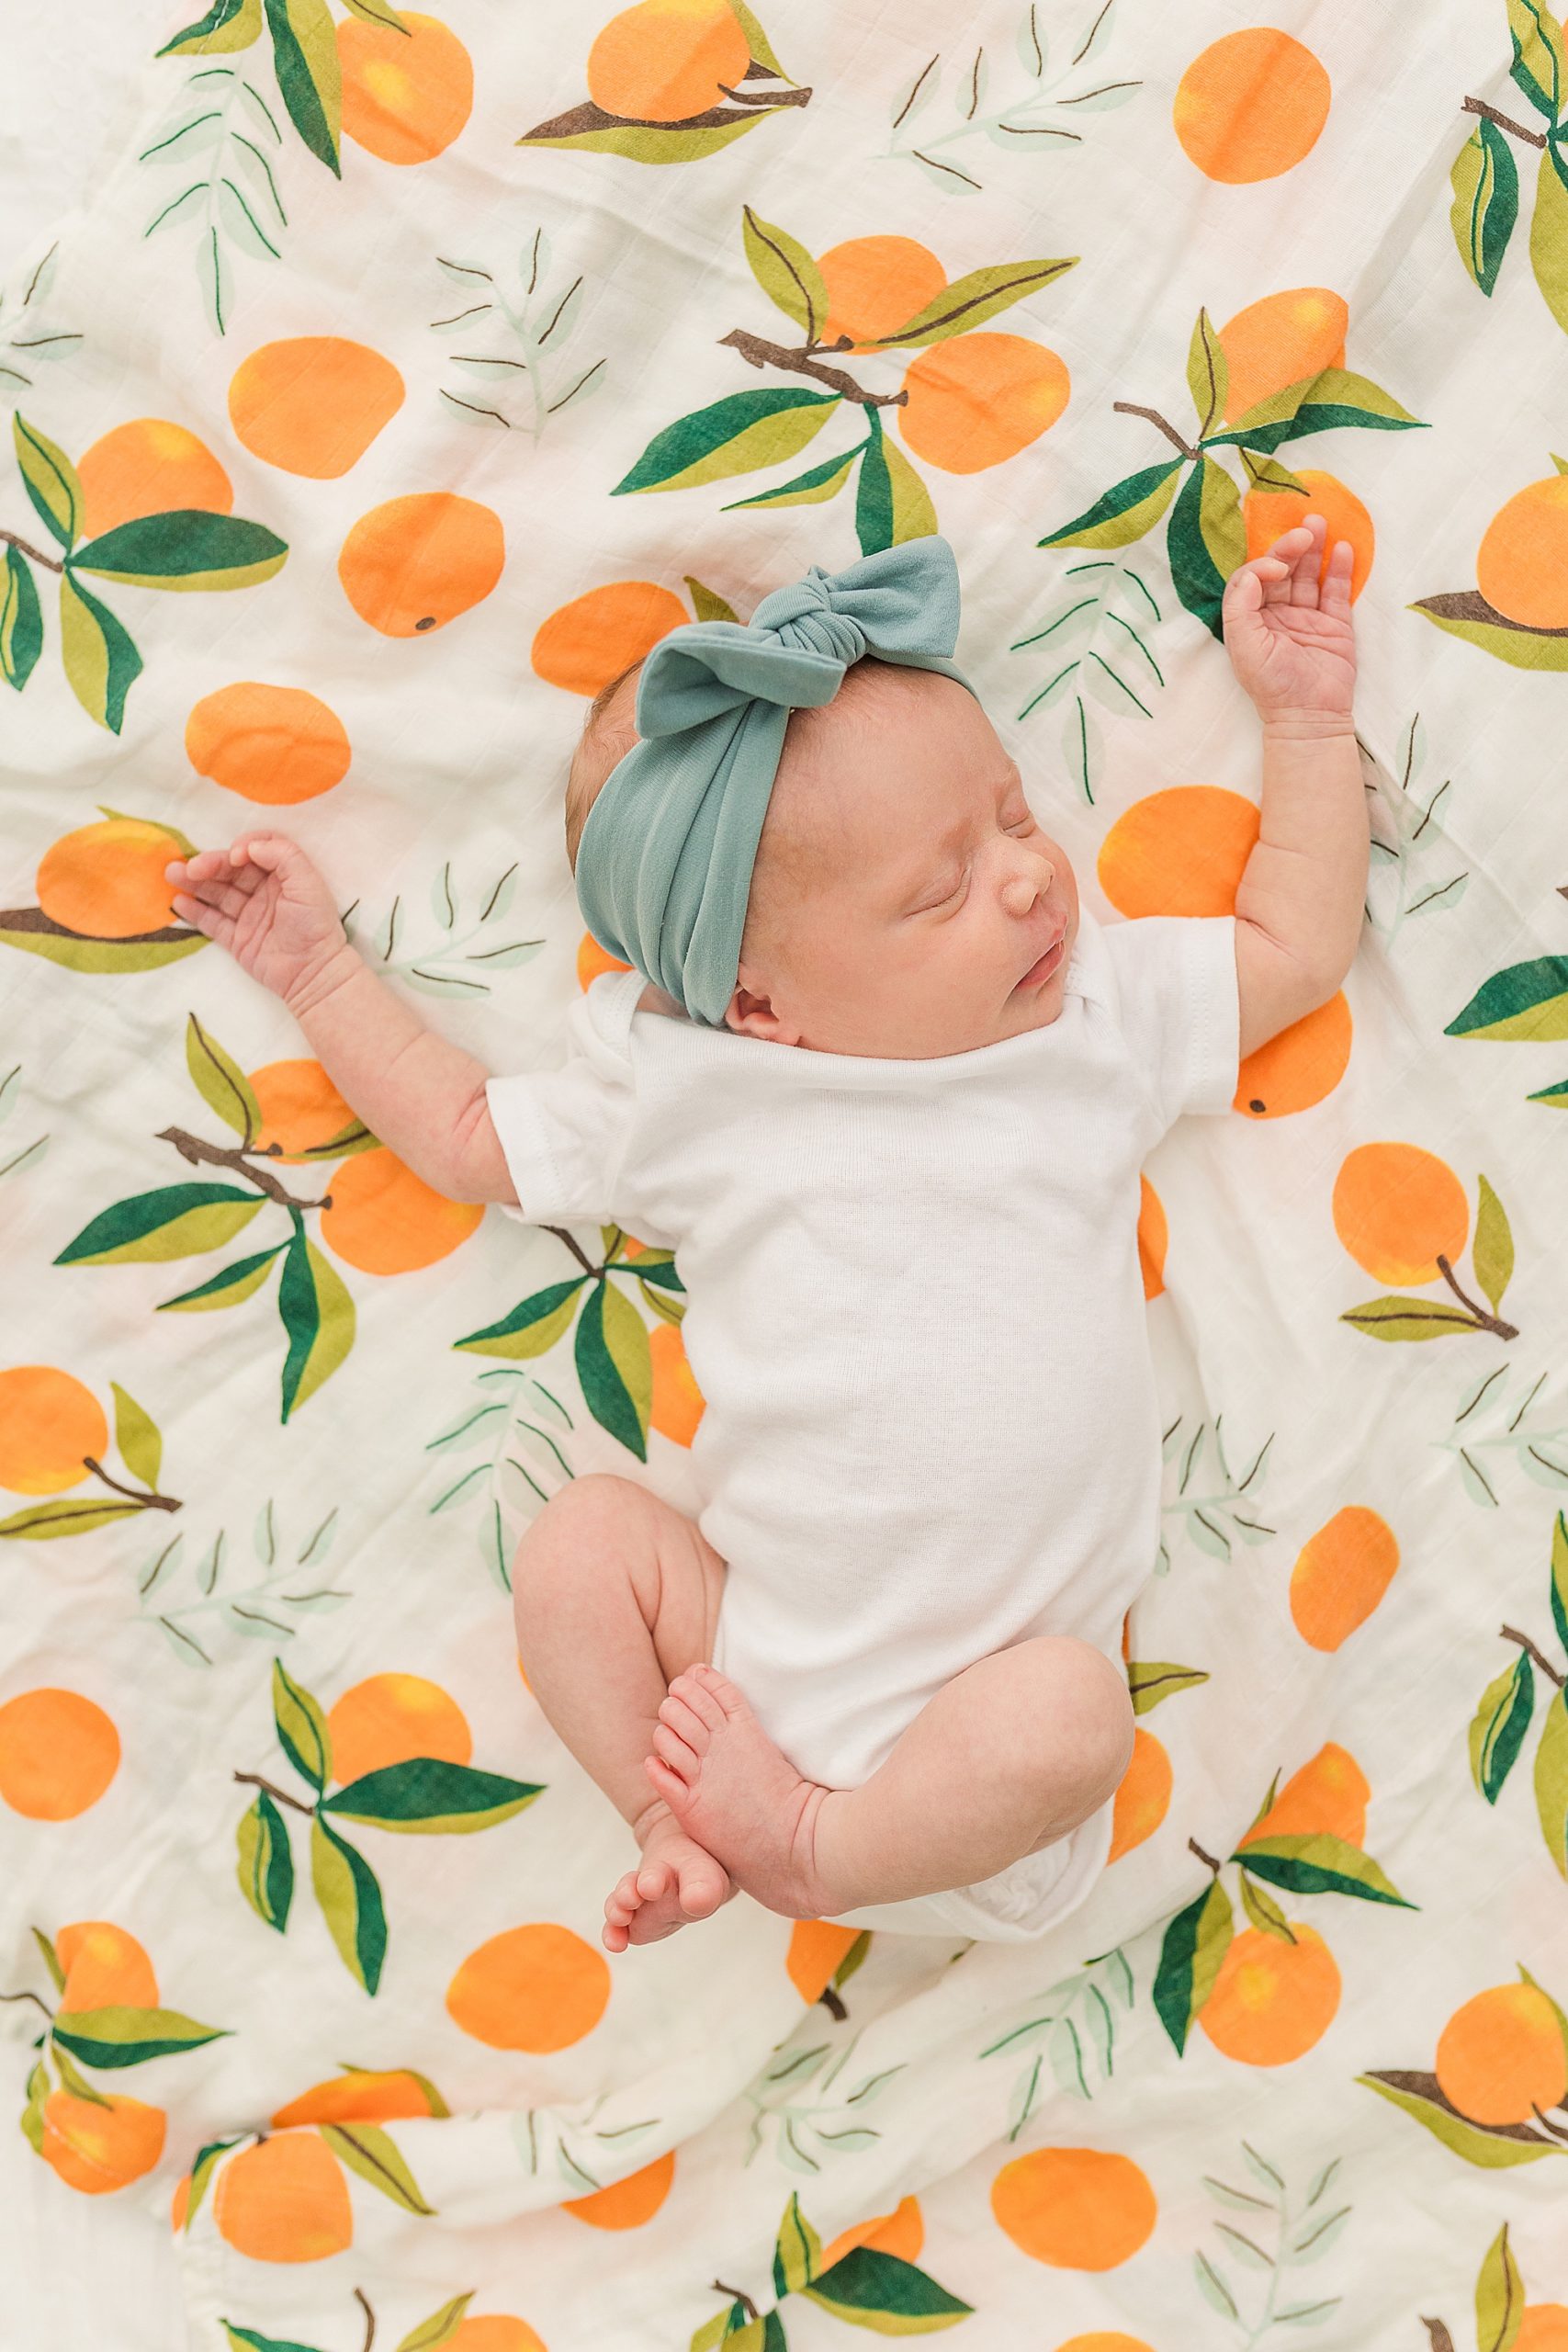 baby girl lays on citrus blanket at home 